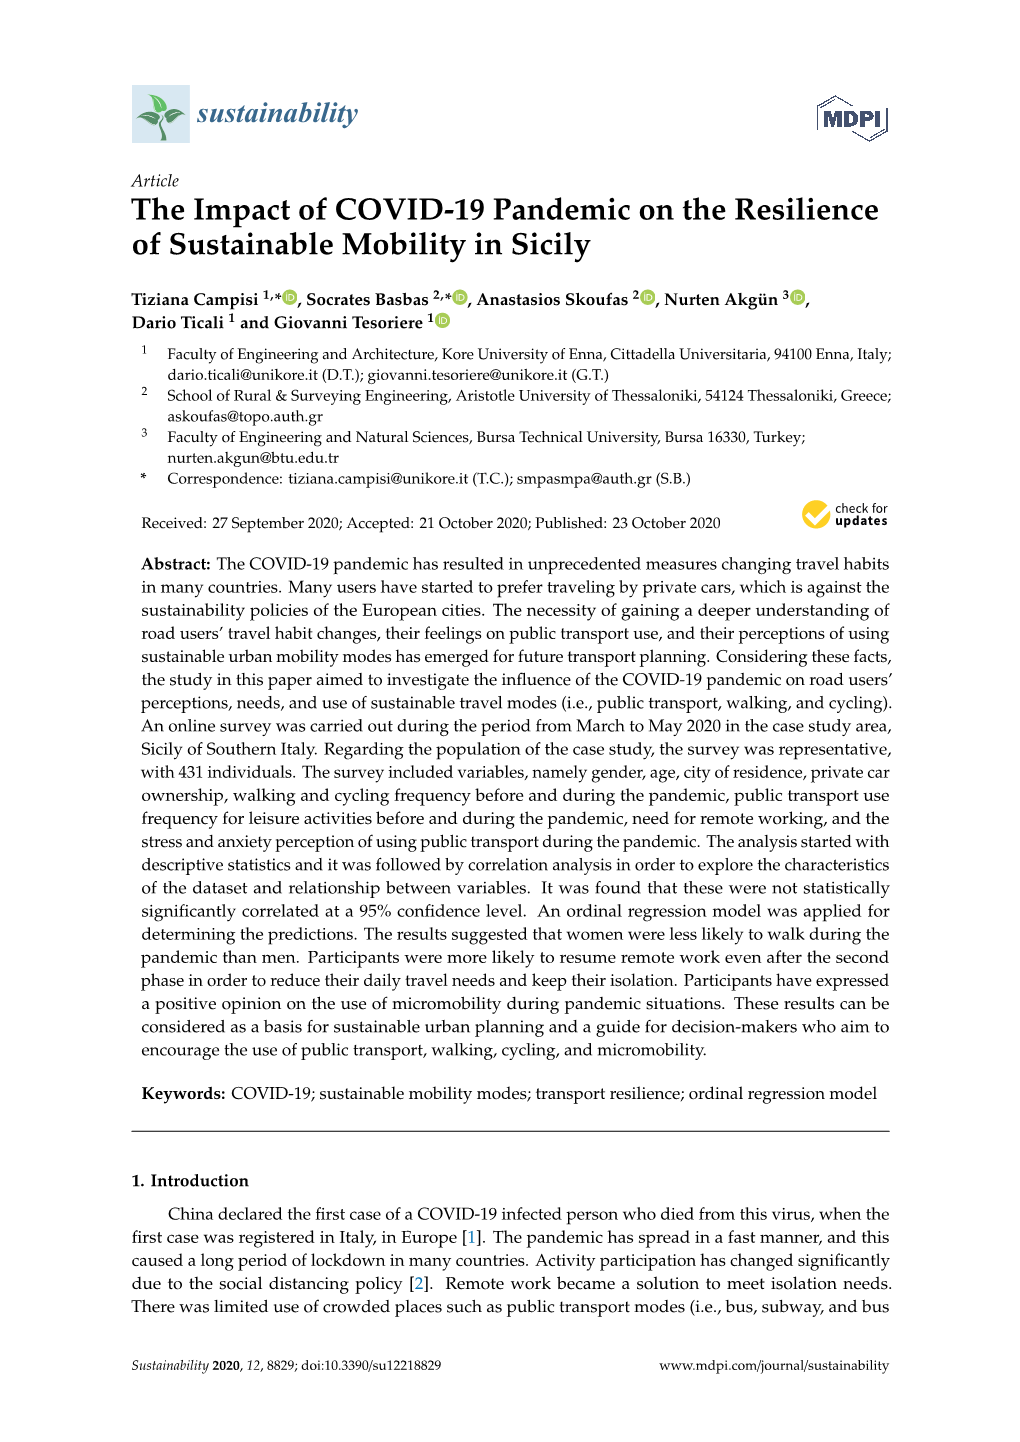 The Impact of COVID-19 Pandemic on the Resilience of Sustainable Mobility in Sicily